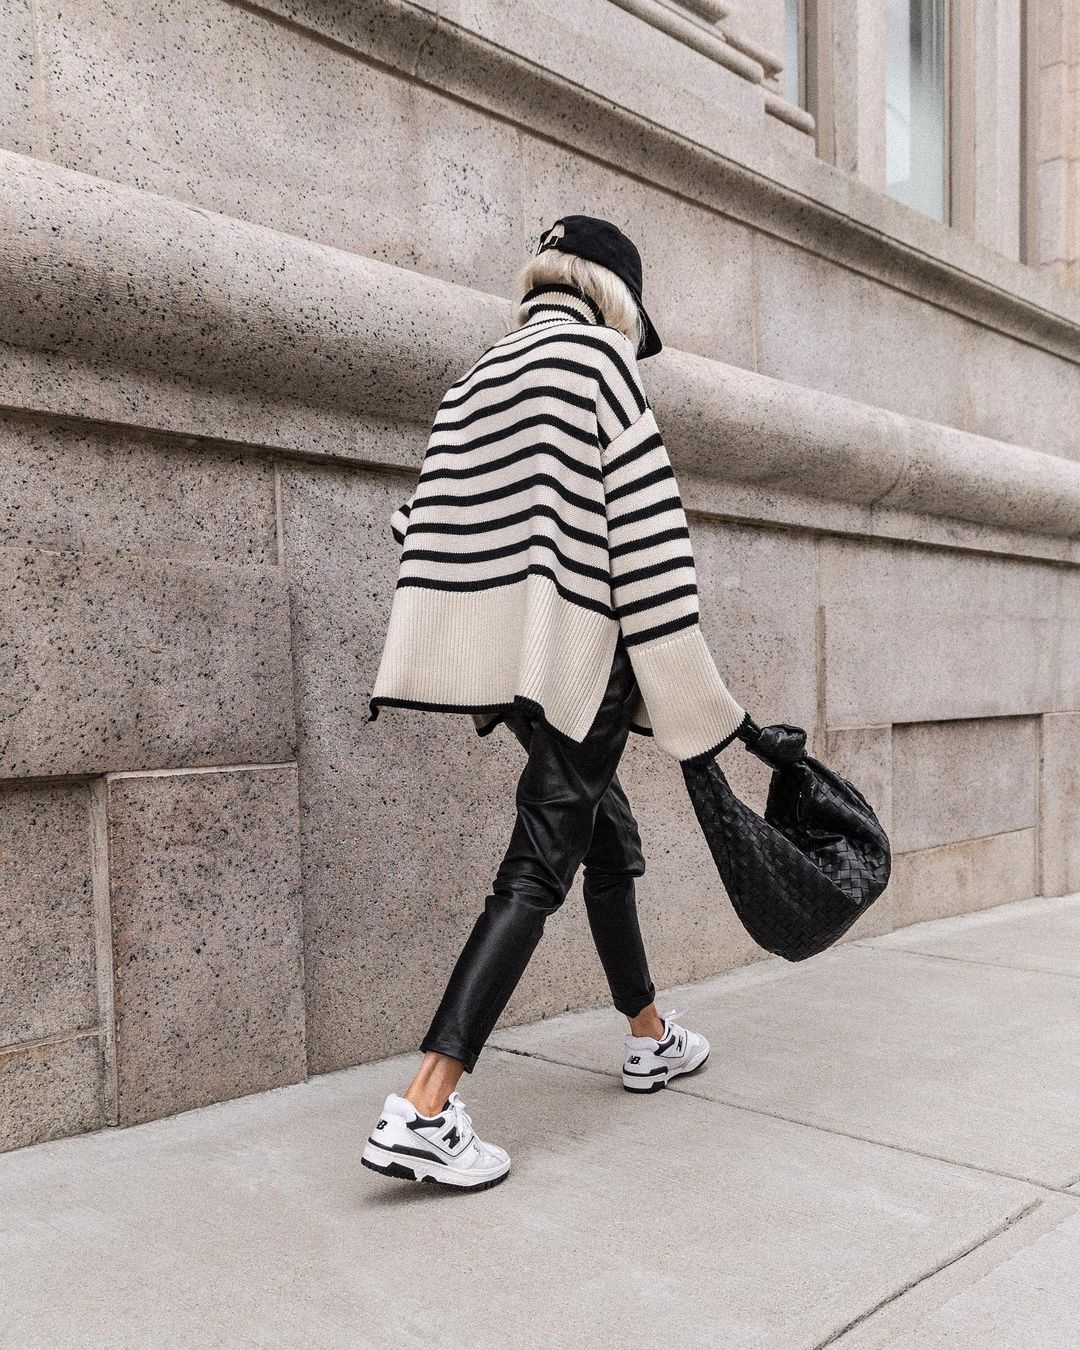 Wardrobe staple: Striped Jumper  Oversized outfit, Casual outfits, Striped  sweater outfit